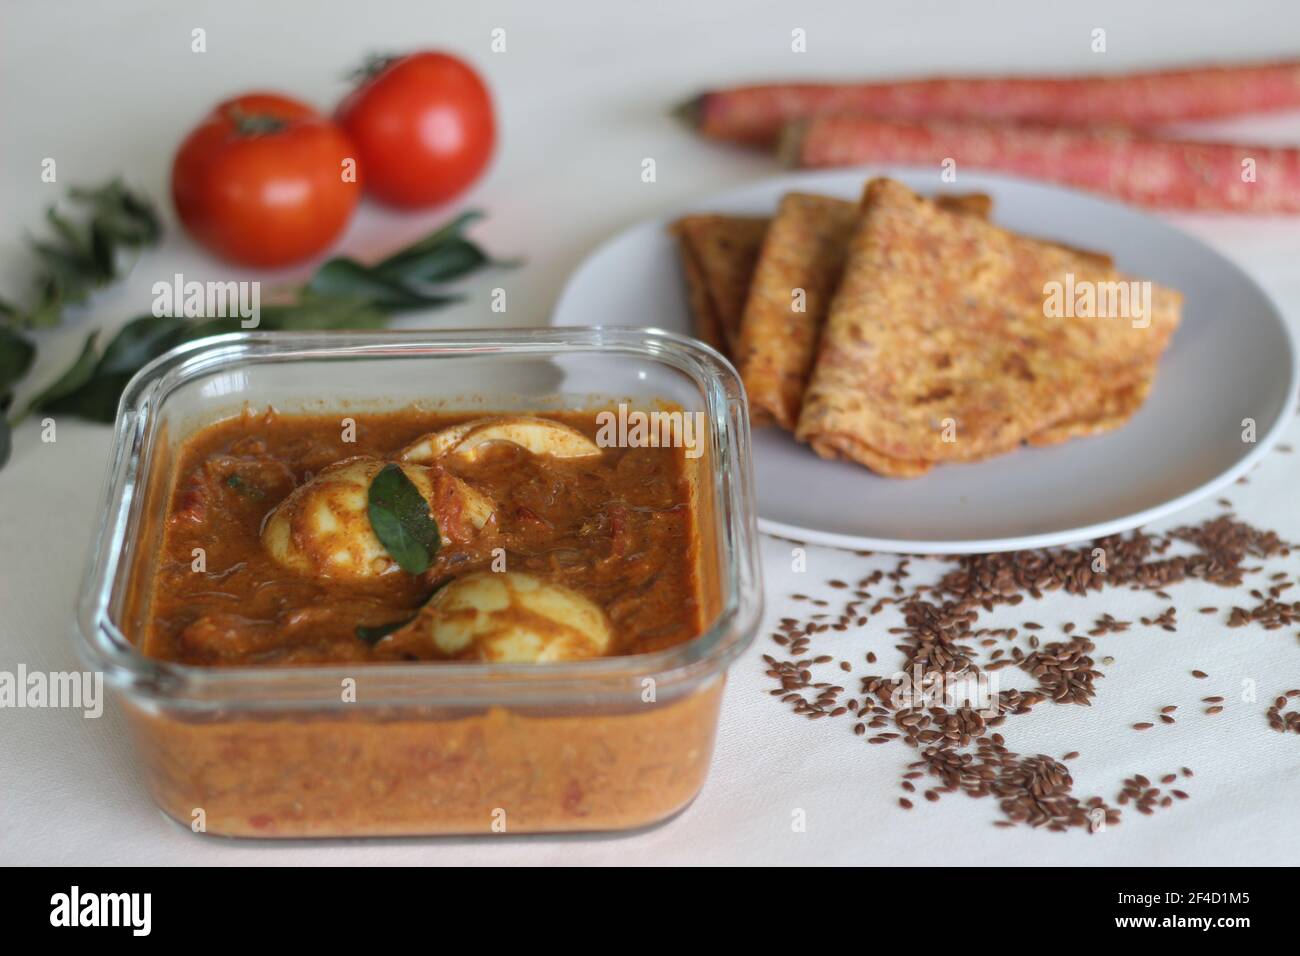 Boiled egg curry, a cashew tomato based gravy served along with whole wheat Indian flat bread made of grated carrots and powdered flax seed. Shot on w Stock Photo